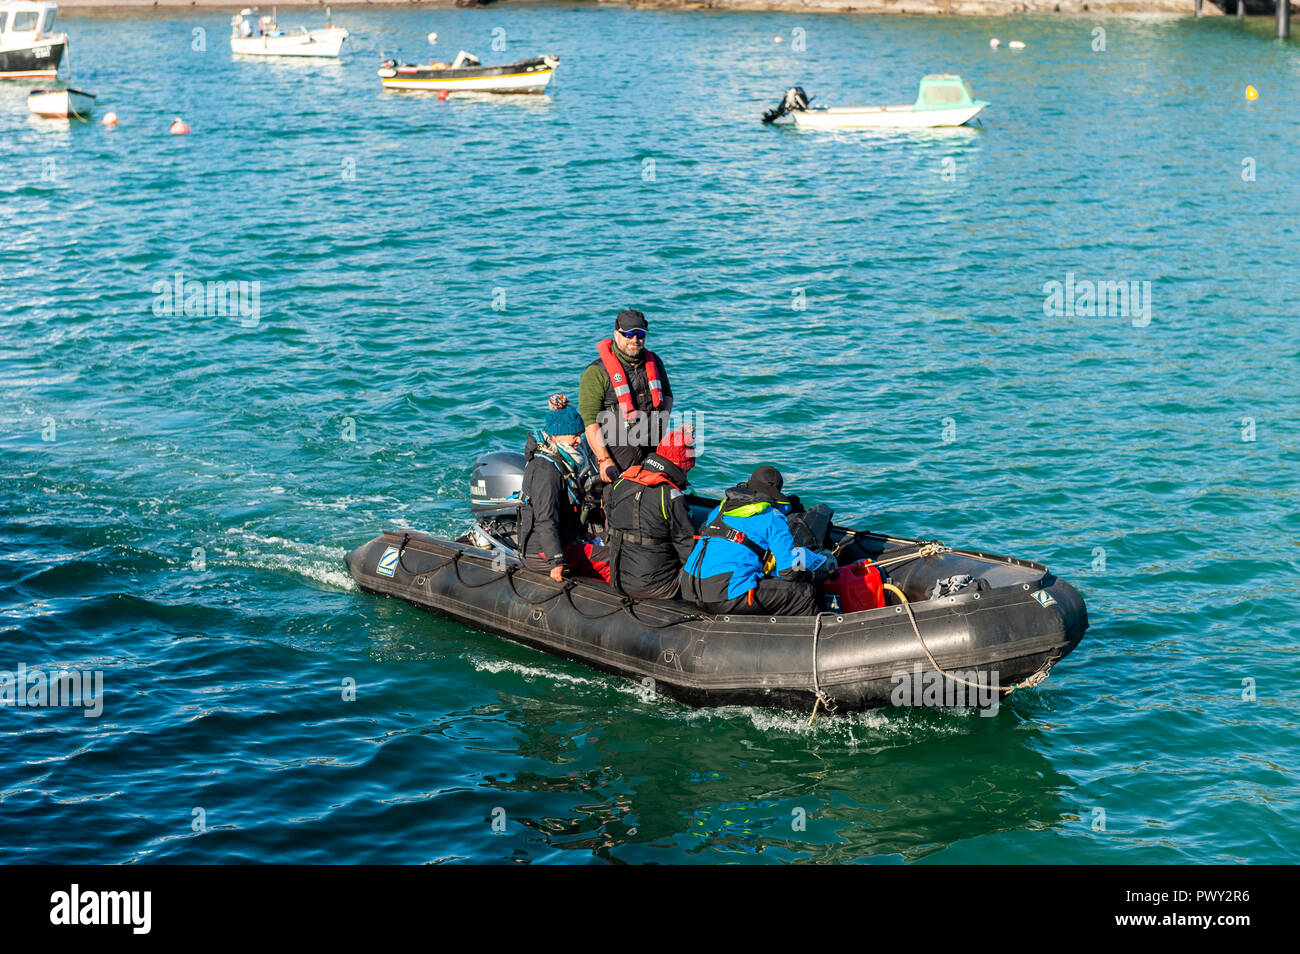 Schull, West Cork, Ireland. 18th Oct, 2018. Members of the National Parks and Wildlife Service board their RIB to spend a day counting seals and their pups around the islands near Schull as part of the Irish Government's conservation policy. The day will be dry and bright with sunny spells and temperatures of 11 to 14°C. Credit: Andy Gibson/Alamy Live News. Stock Photo